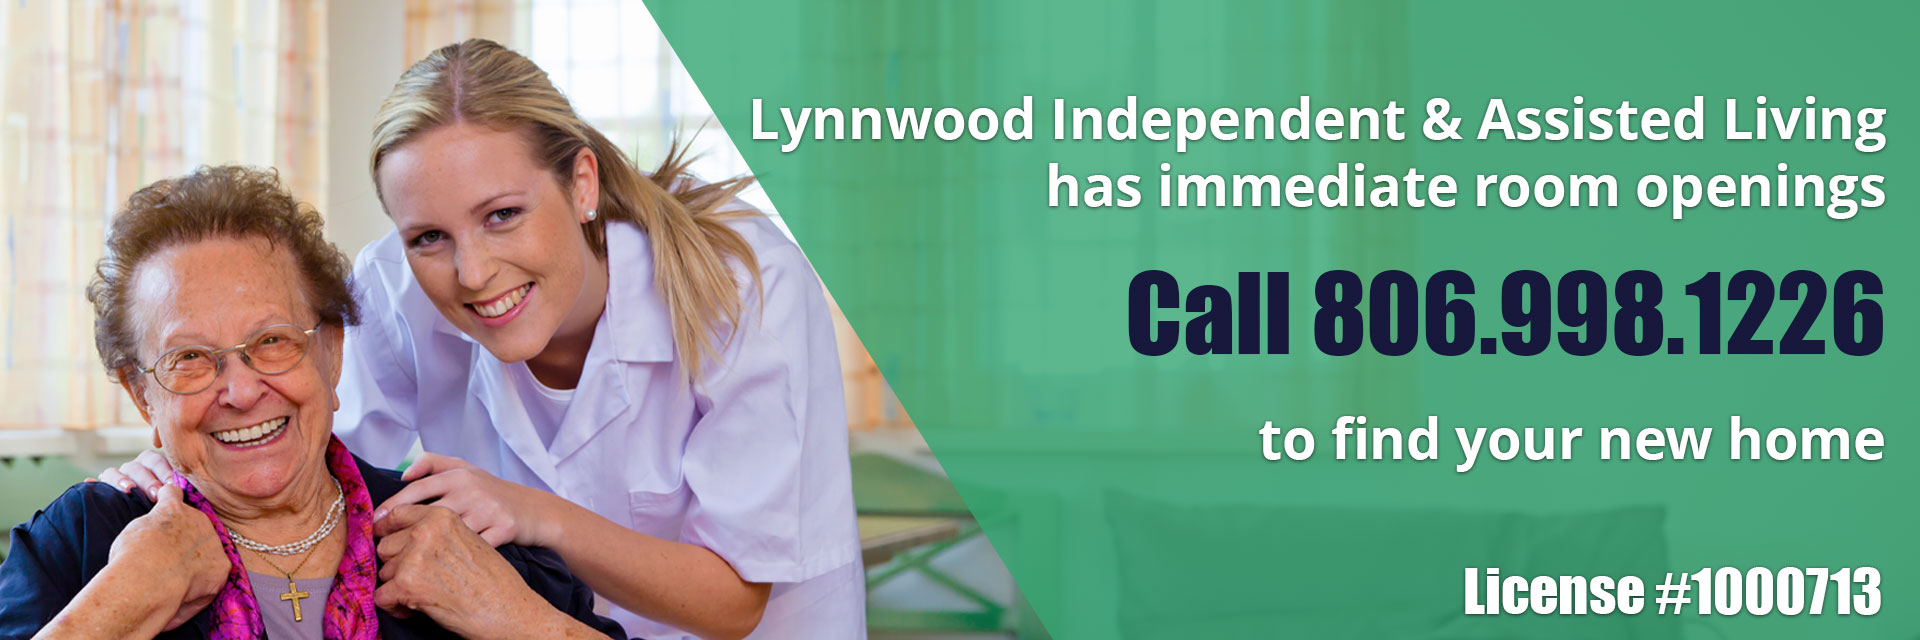 Lynnwood Independent & Assisted Living has immediate room openings. Call 806.998.1226 to find your new home. License #1000713